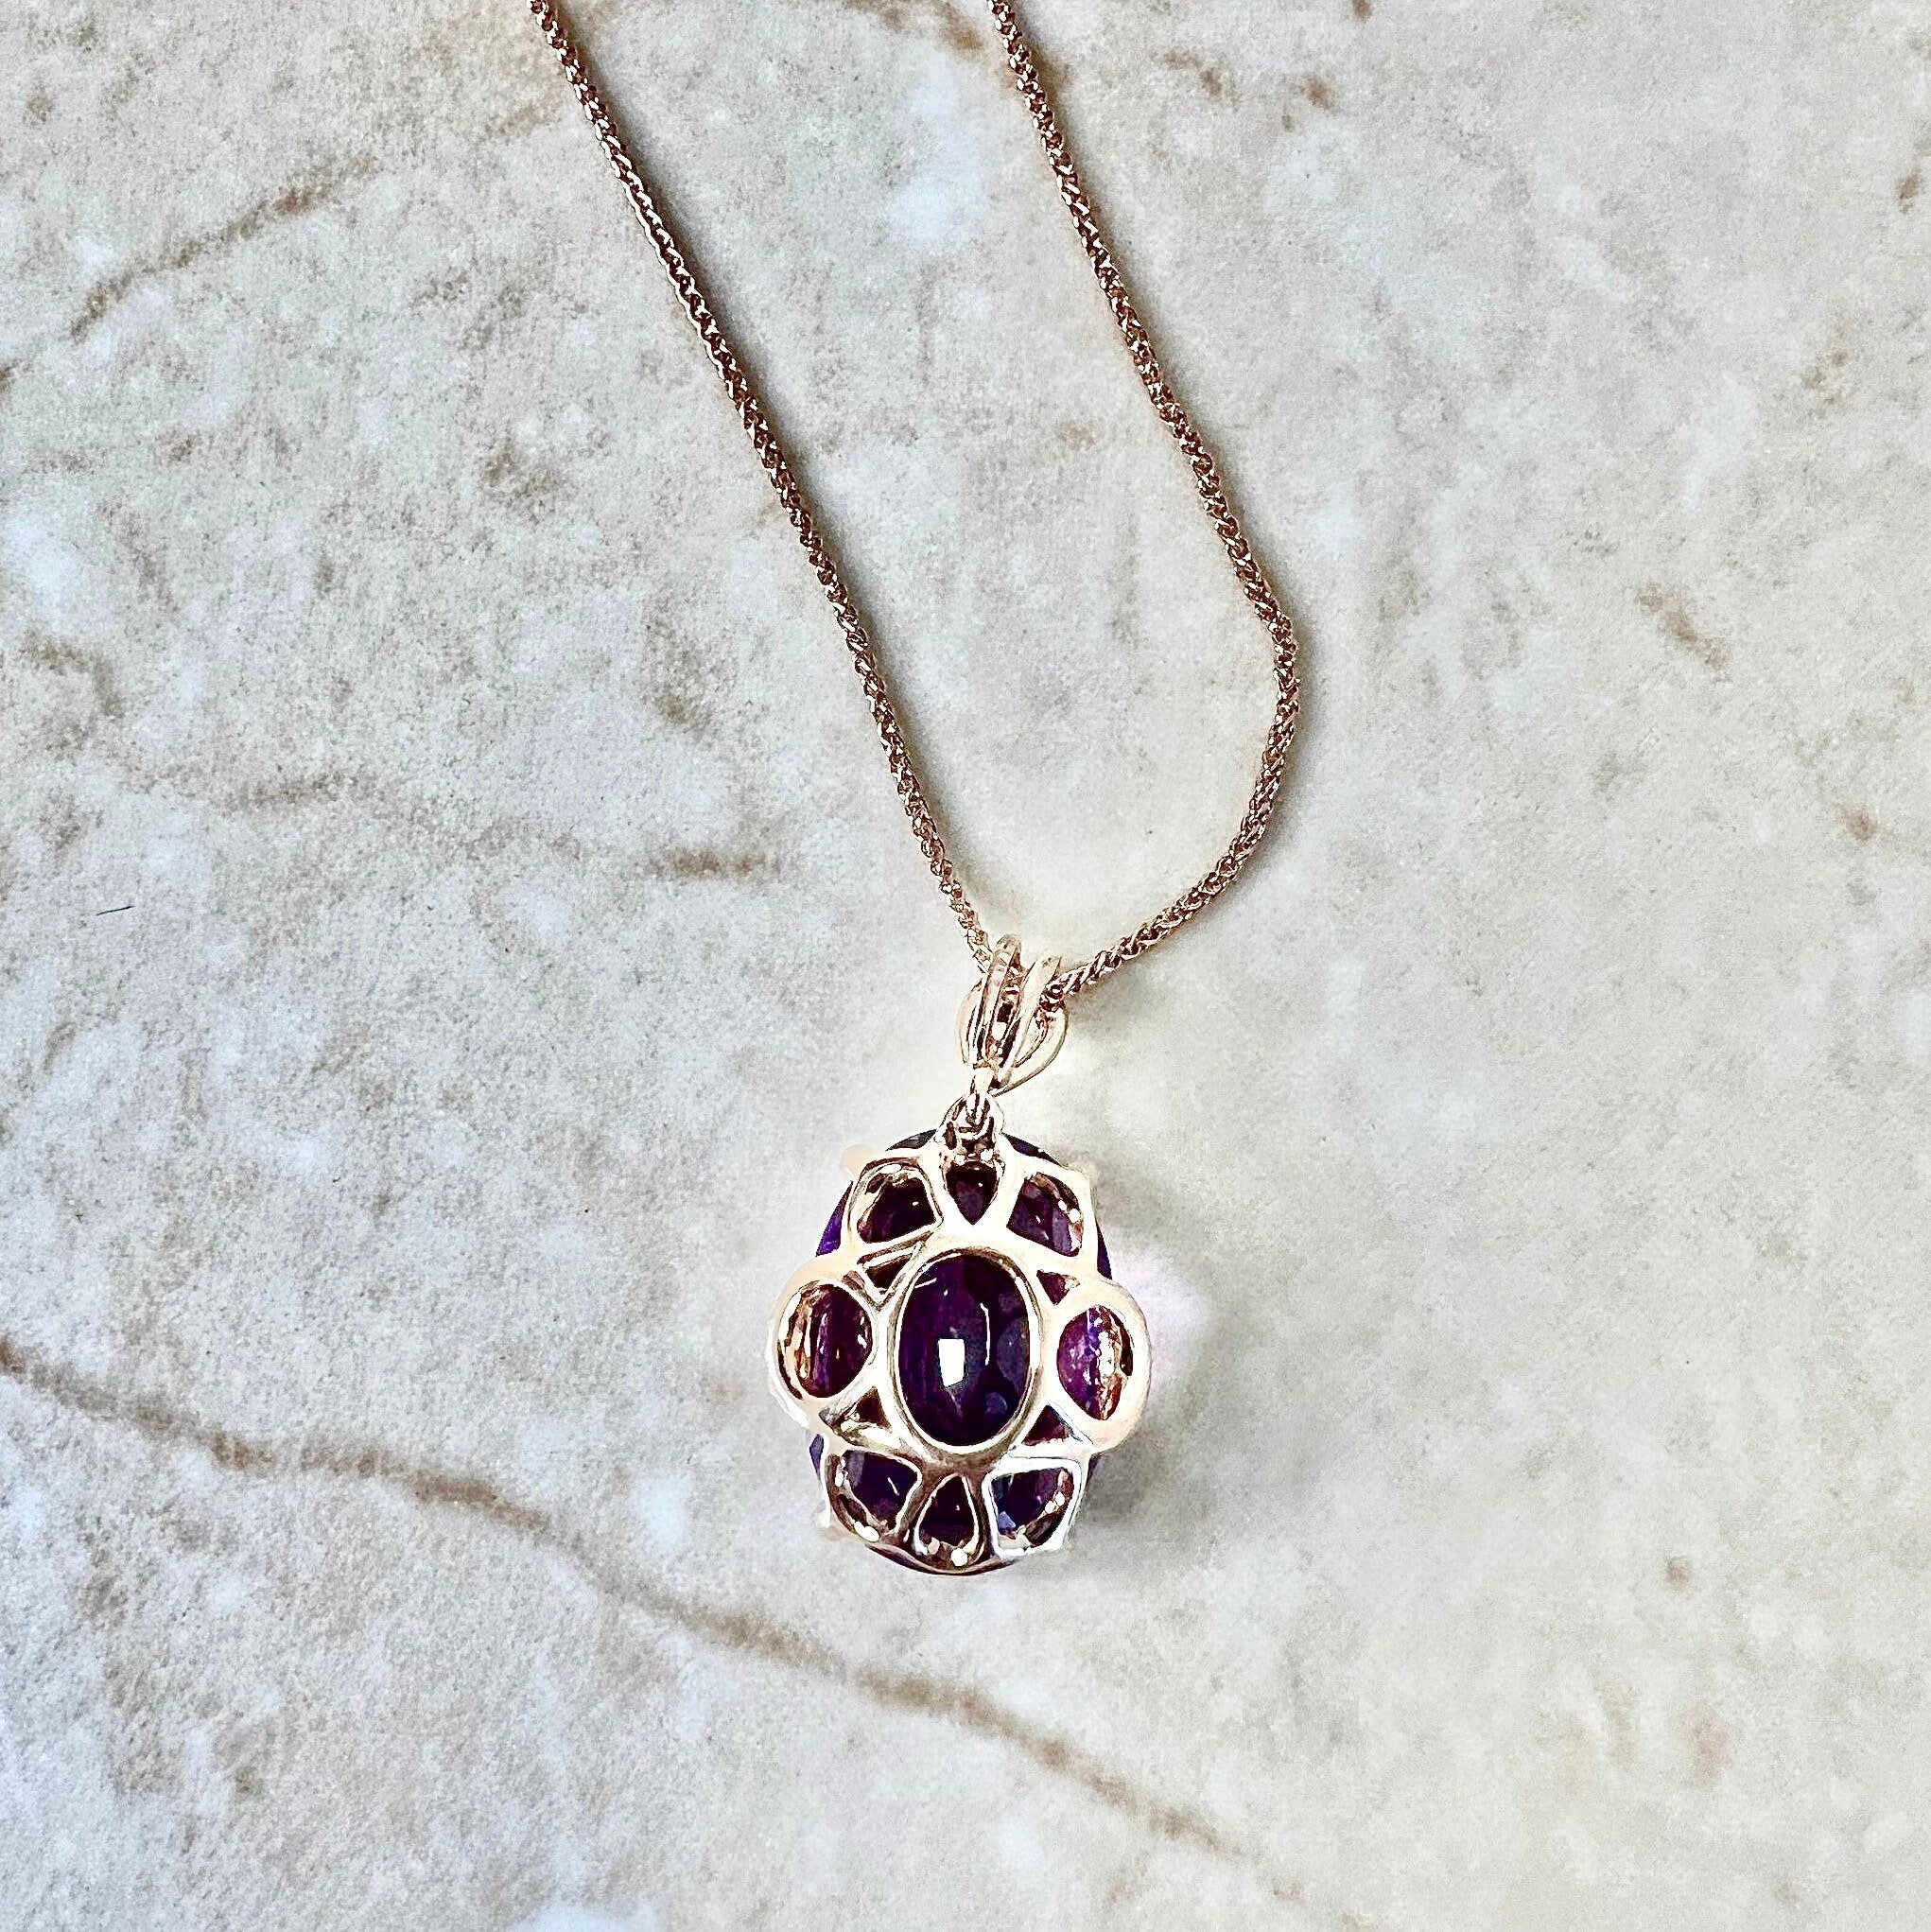 Raw Amethyst Necklace for Women Large Amethyst Pendant Necklace Rose Gold  Amethyst Jewelry Real Amethyst Pendulum Purple Crystal Necklace - Etsy